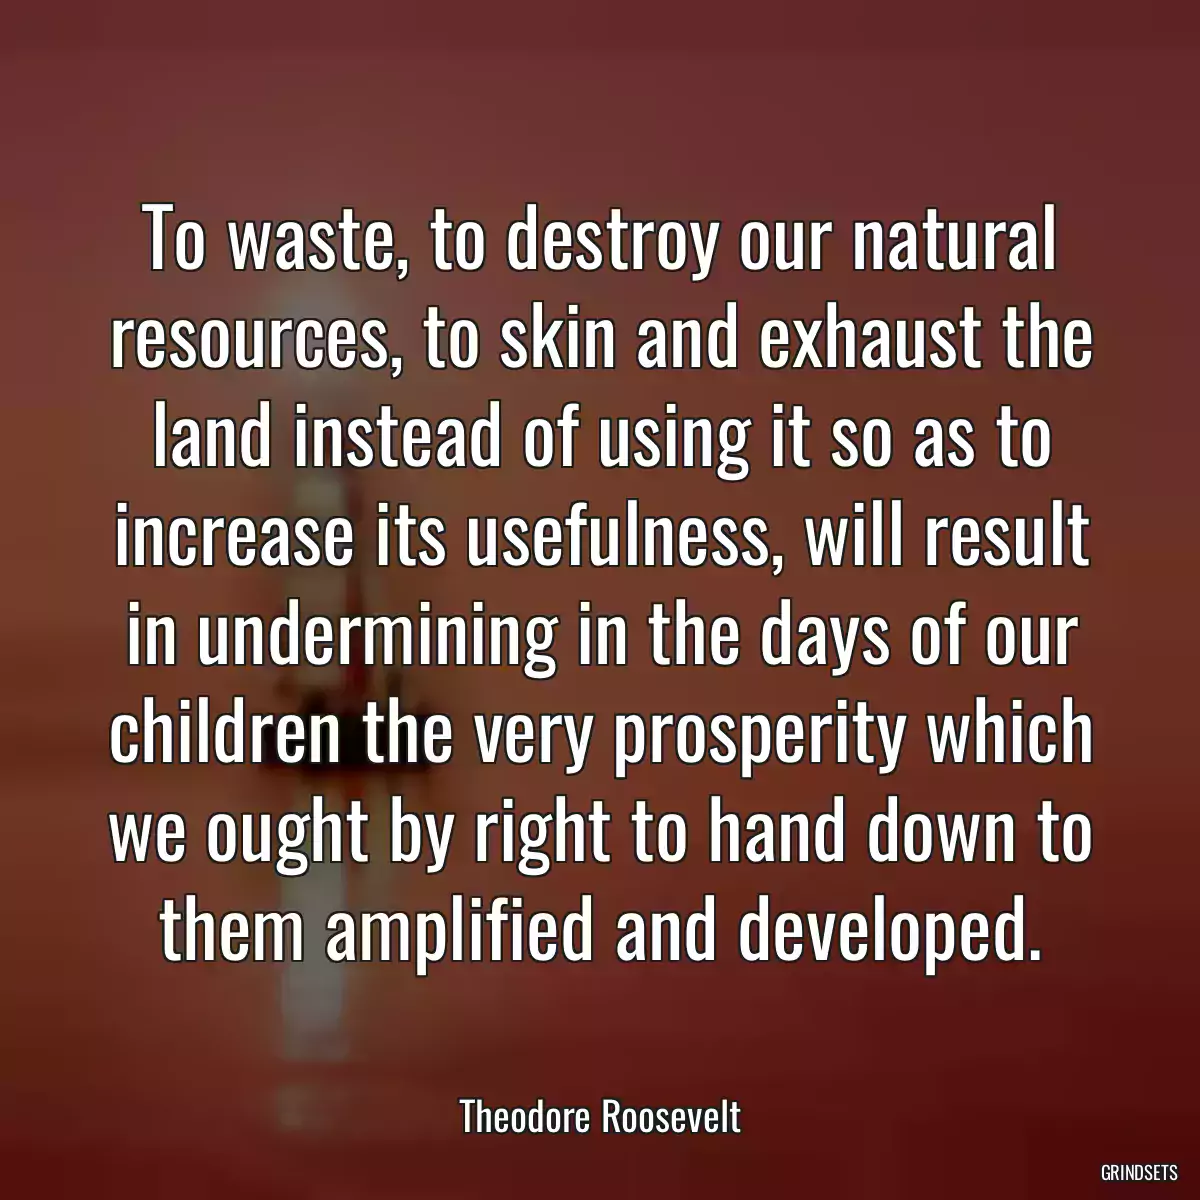 To waste, to destroy our natural resources, to skin and exhaust the land instead of using it so as to increase its usefulness, will result in undermining in the days of our children the very prosperity which we ought by right to hand down to them amplified and developed.